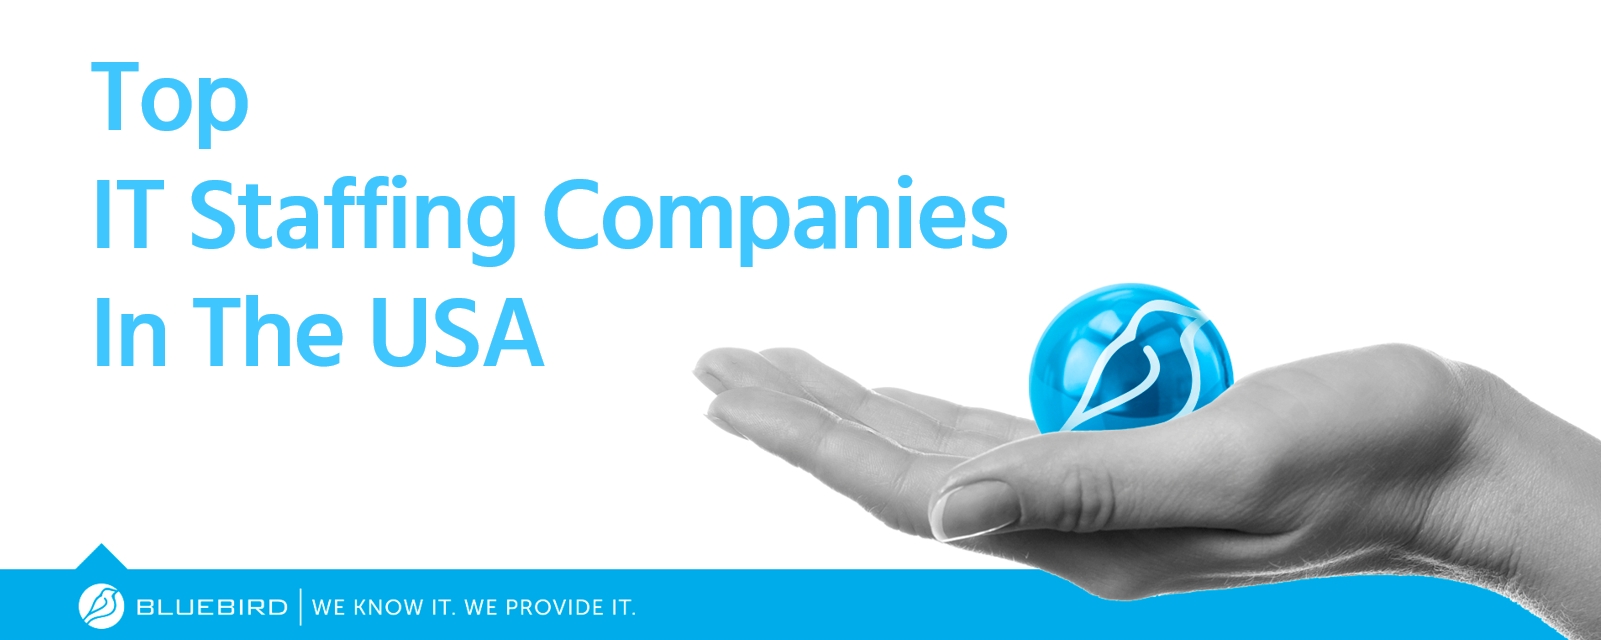 Top IT Staffing Companies in the USA